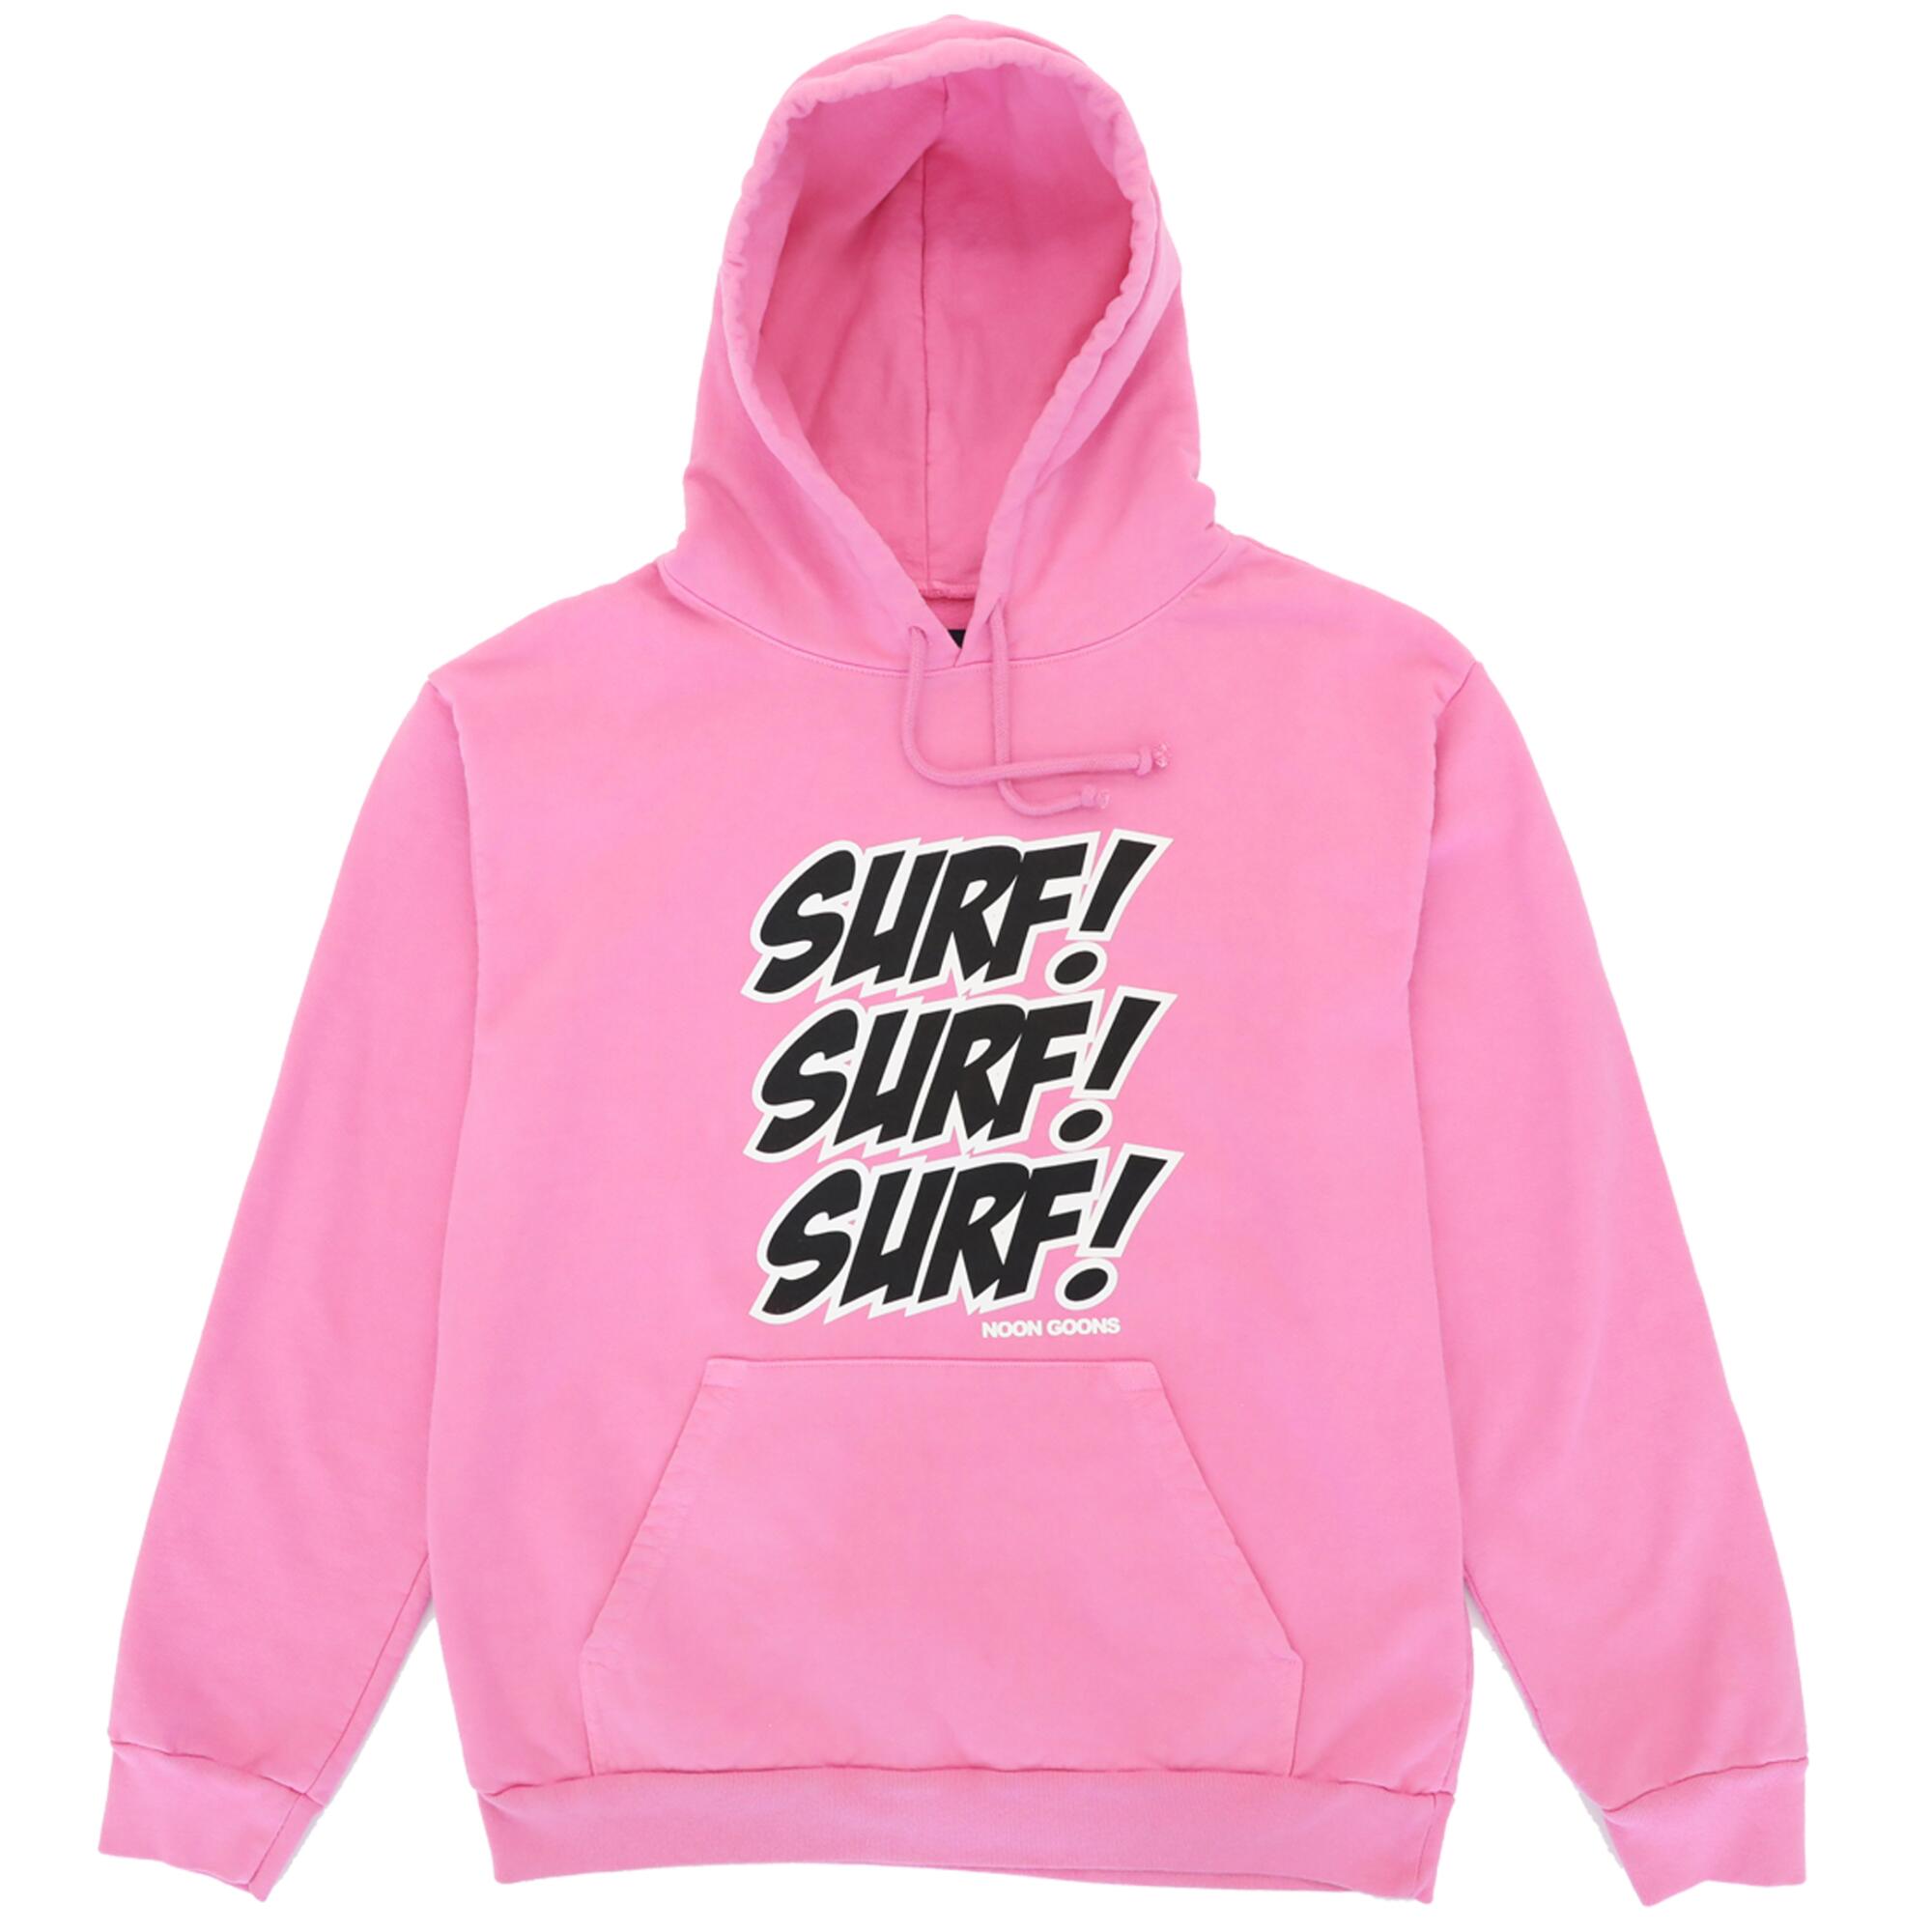 Pink hoodie with "Surf! Surf! Surf!" on it